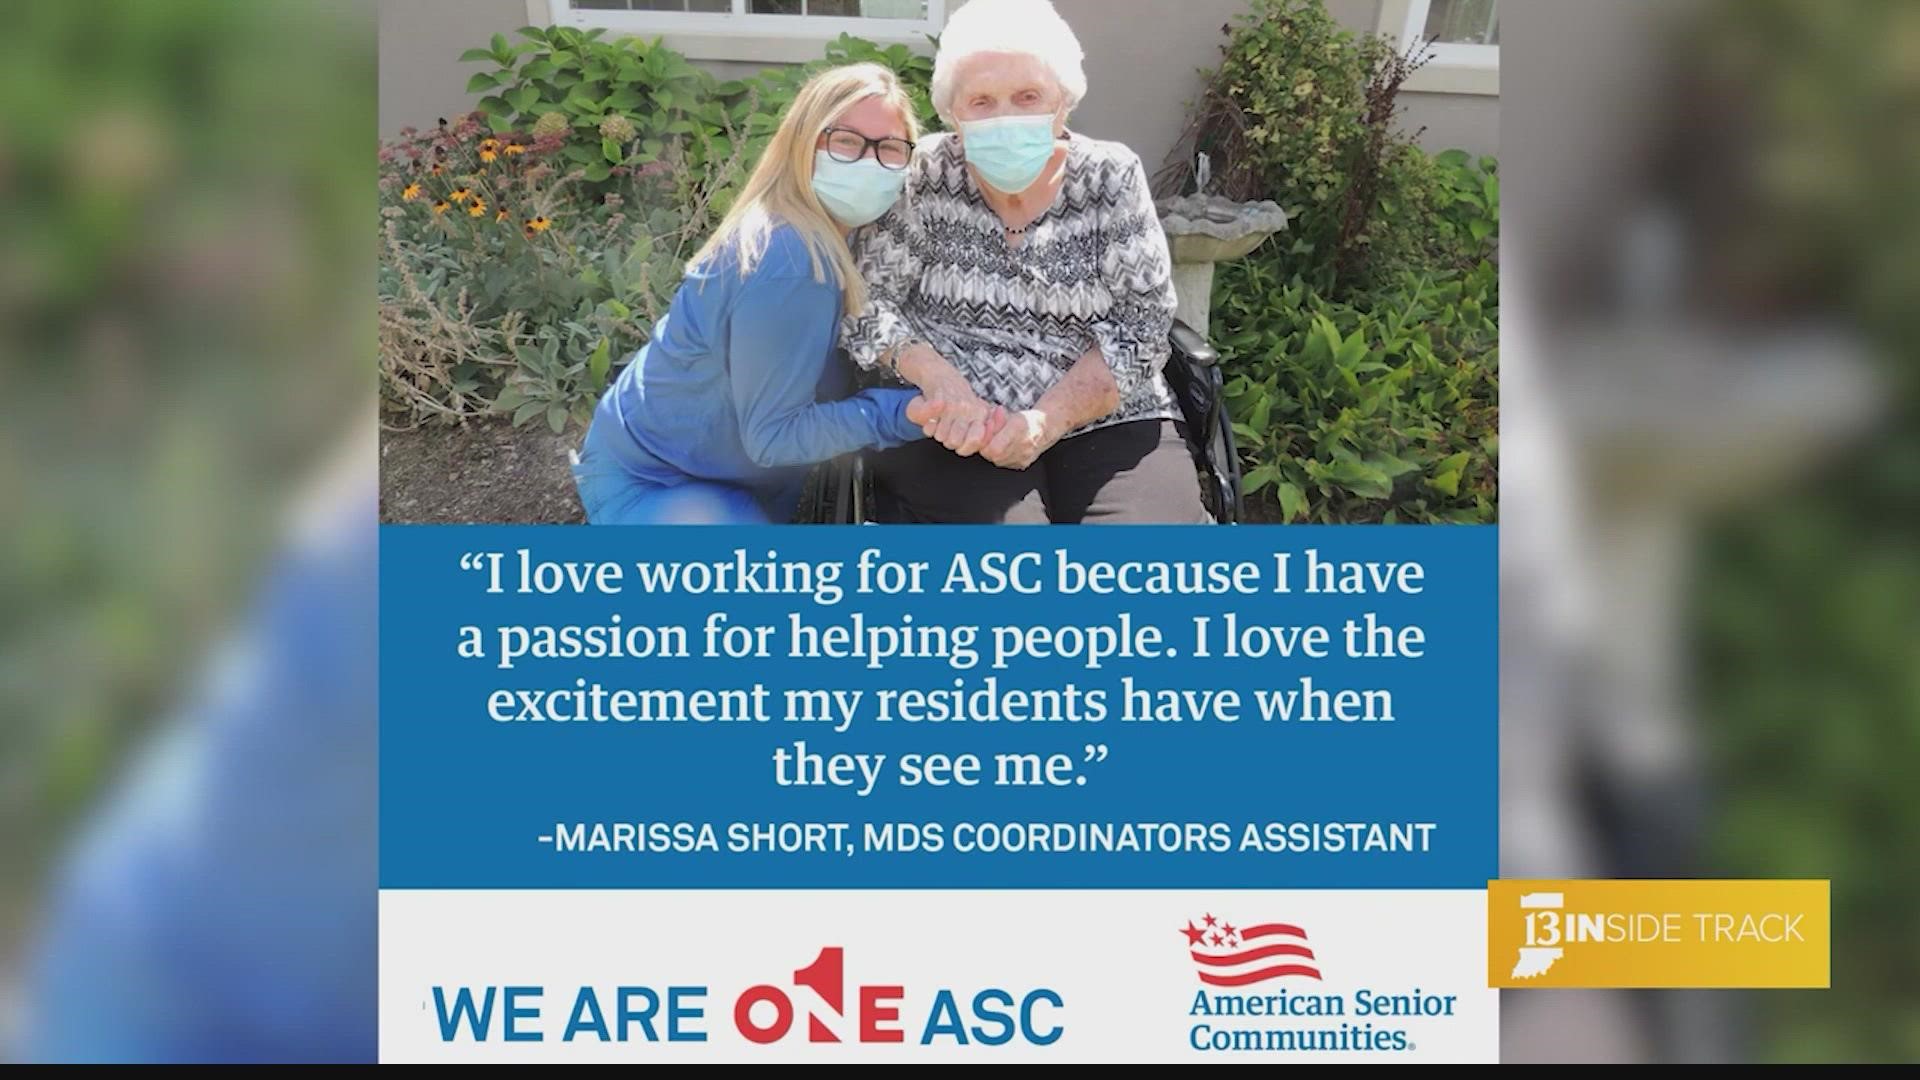 ASC offers flexible work schedules to promote work/life balance and professional development opportunities offered to employees.